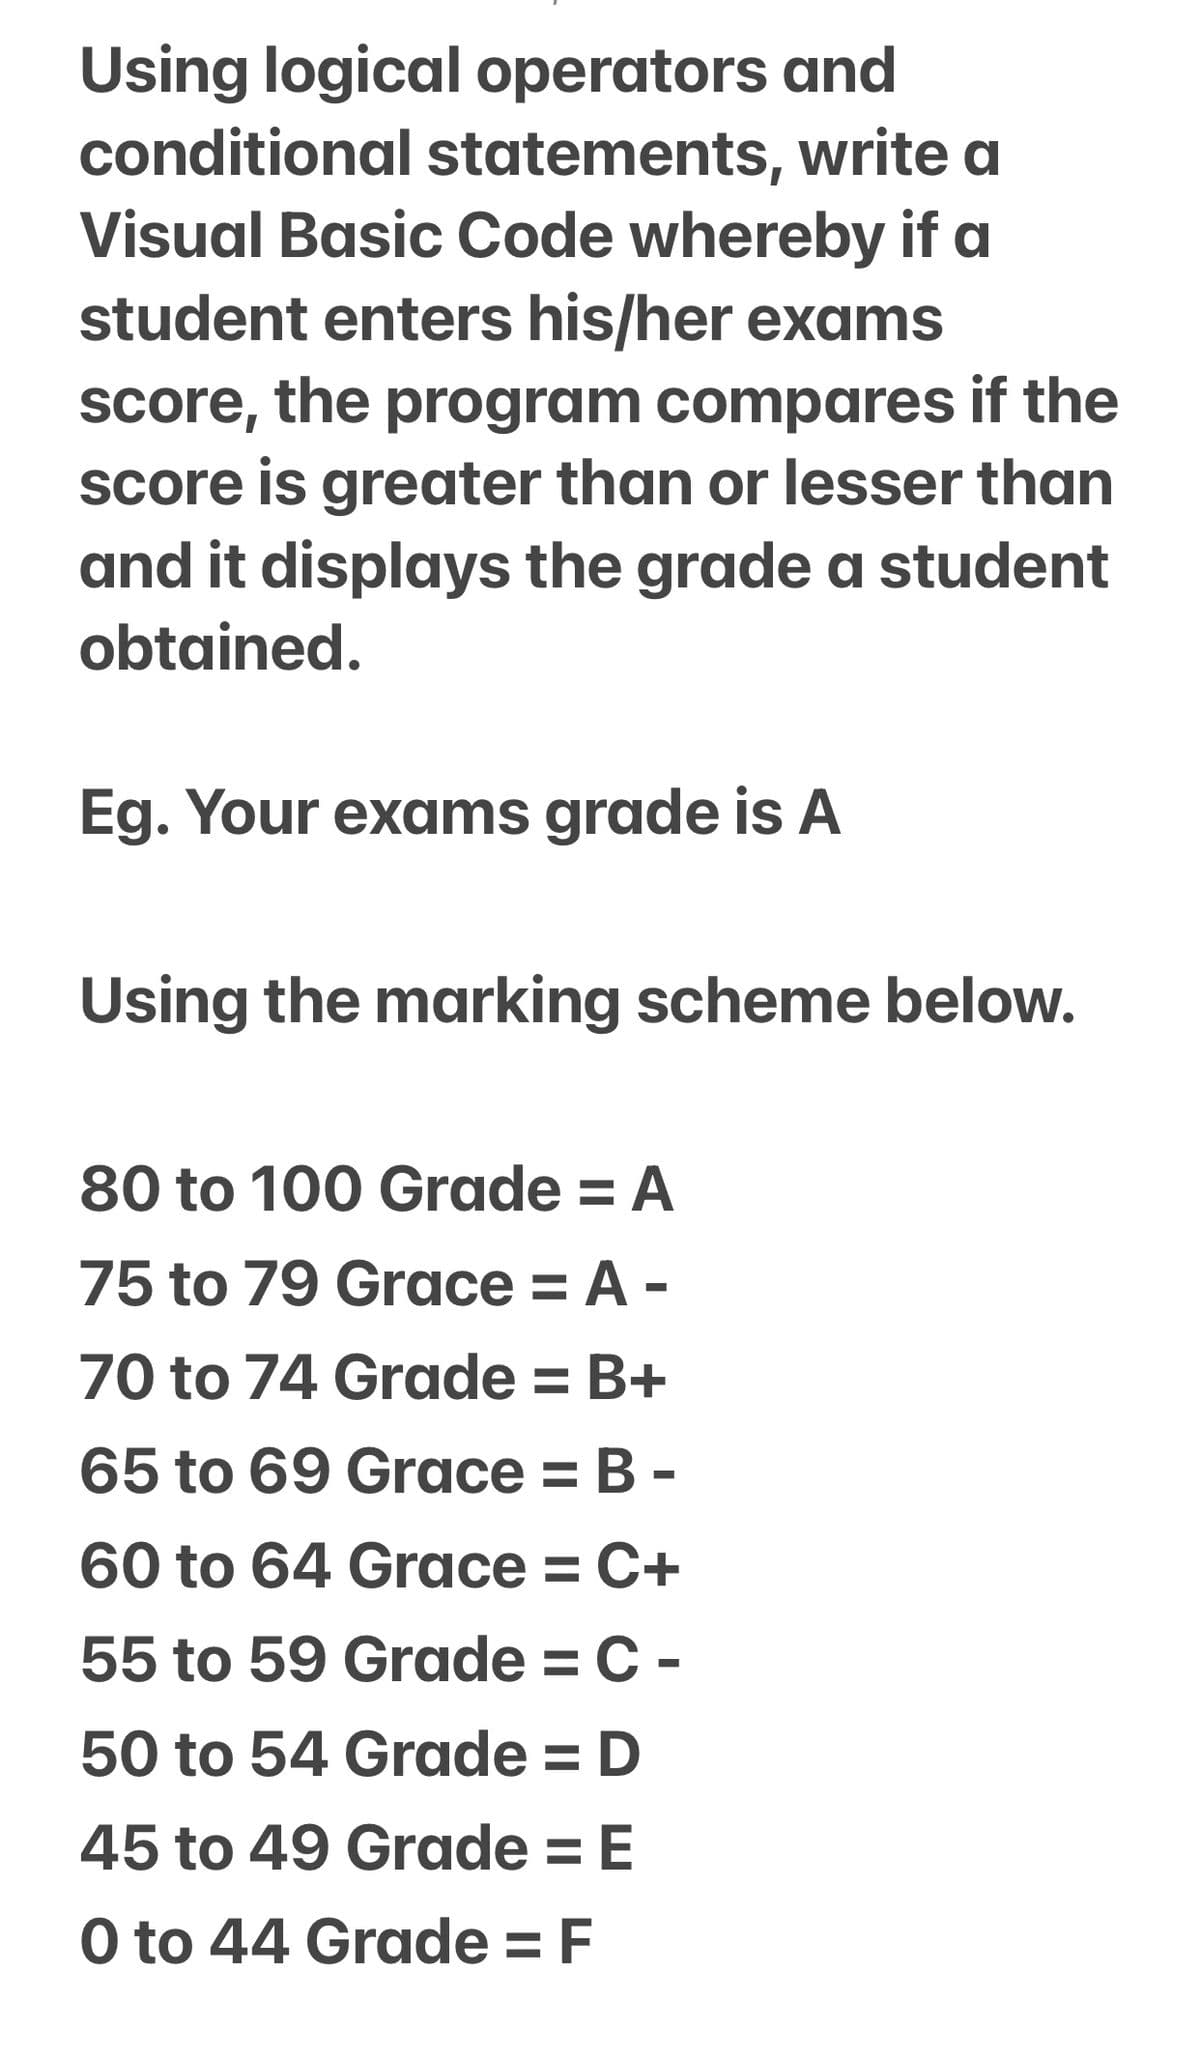 Using logical operators and
conditional statements, write a
Visual Basic Code whereby if a
student enters his/her exams
score, the program compares if the
Score is greater than or lesser than
and it displays the grade a student
obtained.
Eg. Your exams grade is A
Using the marking scheme below.
80 to 100 Grade = A
75 to 79 Grace = A -
70 to 74 Grade = B+
65 to 69 Grace = B -
%3D
60 to 64 Grace = C+
55 to 59 Grade = C -
50 to 54 Grade = D
45 to 49 Grade = E
O to 44 Grade = F
